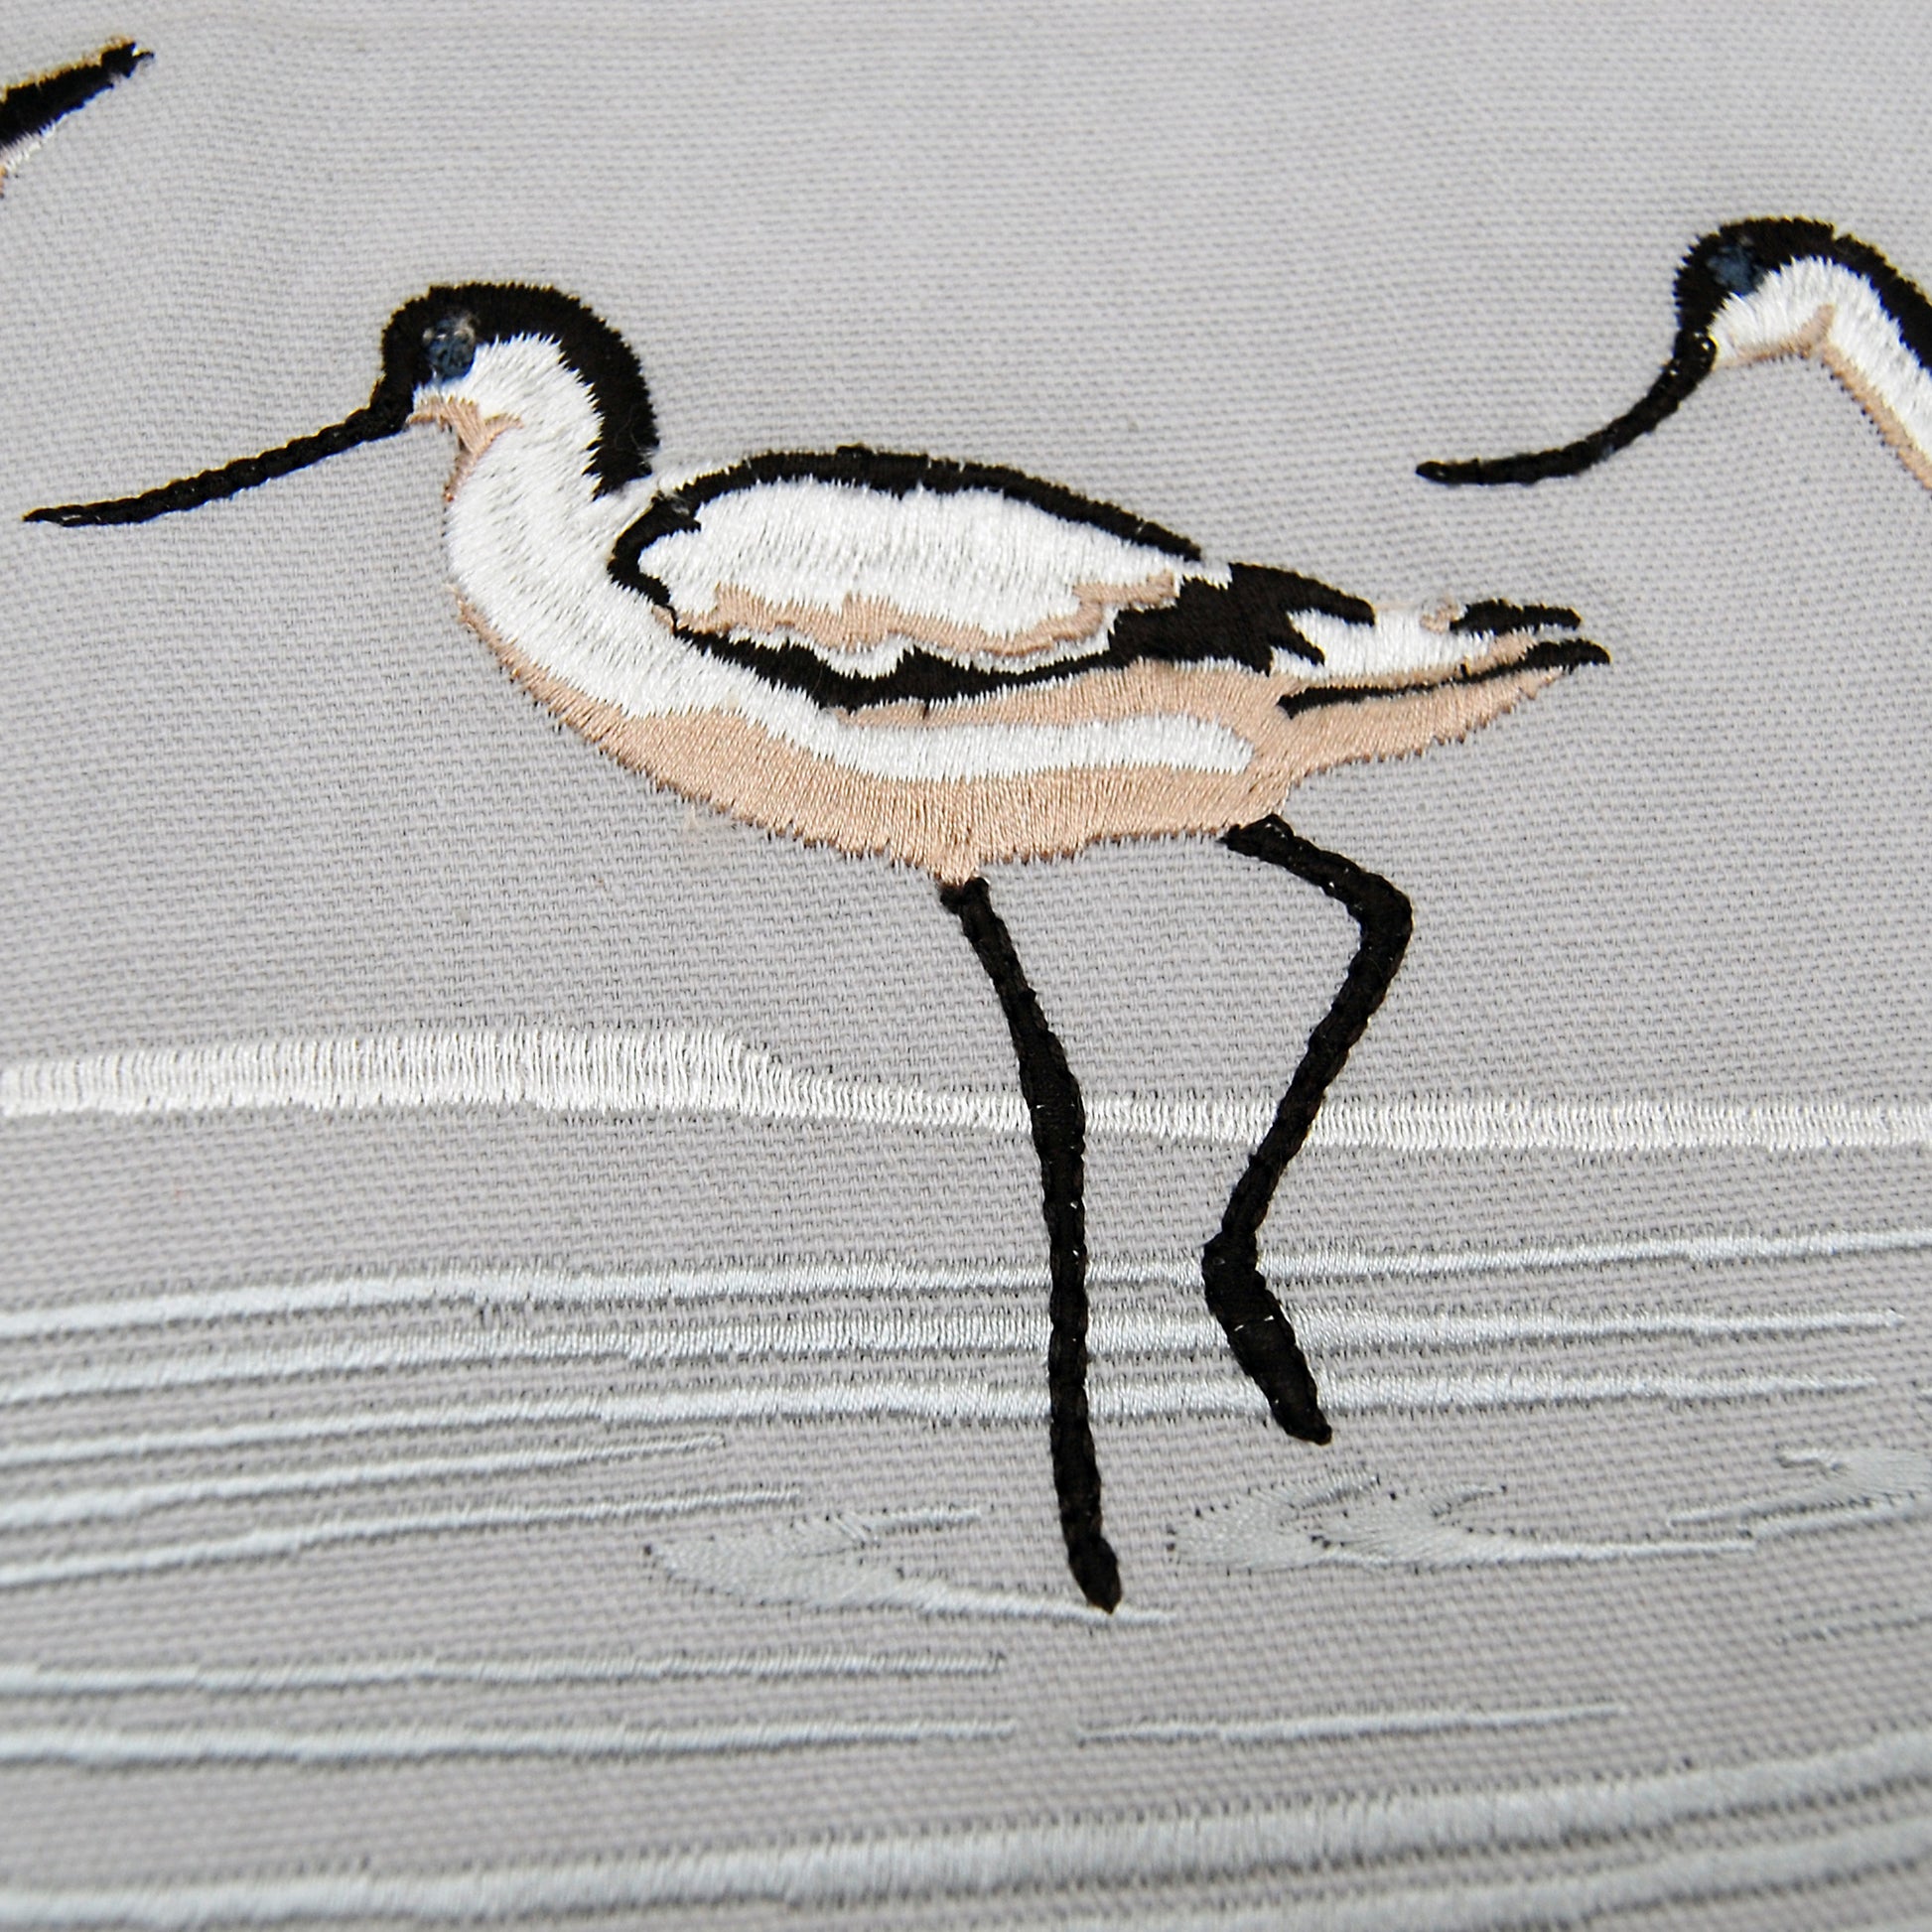 Detailed shot of the embroidery on the Avocet Fringed Lumbar pillow.